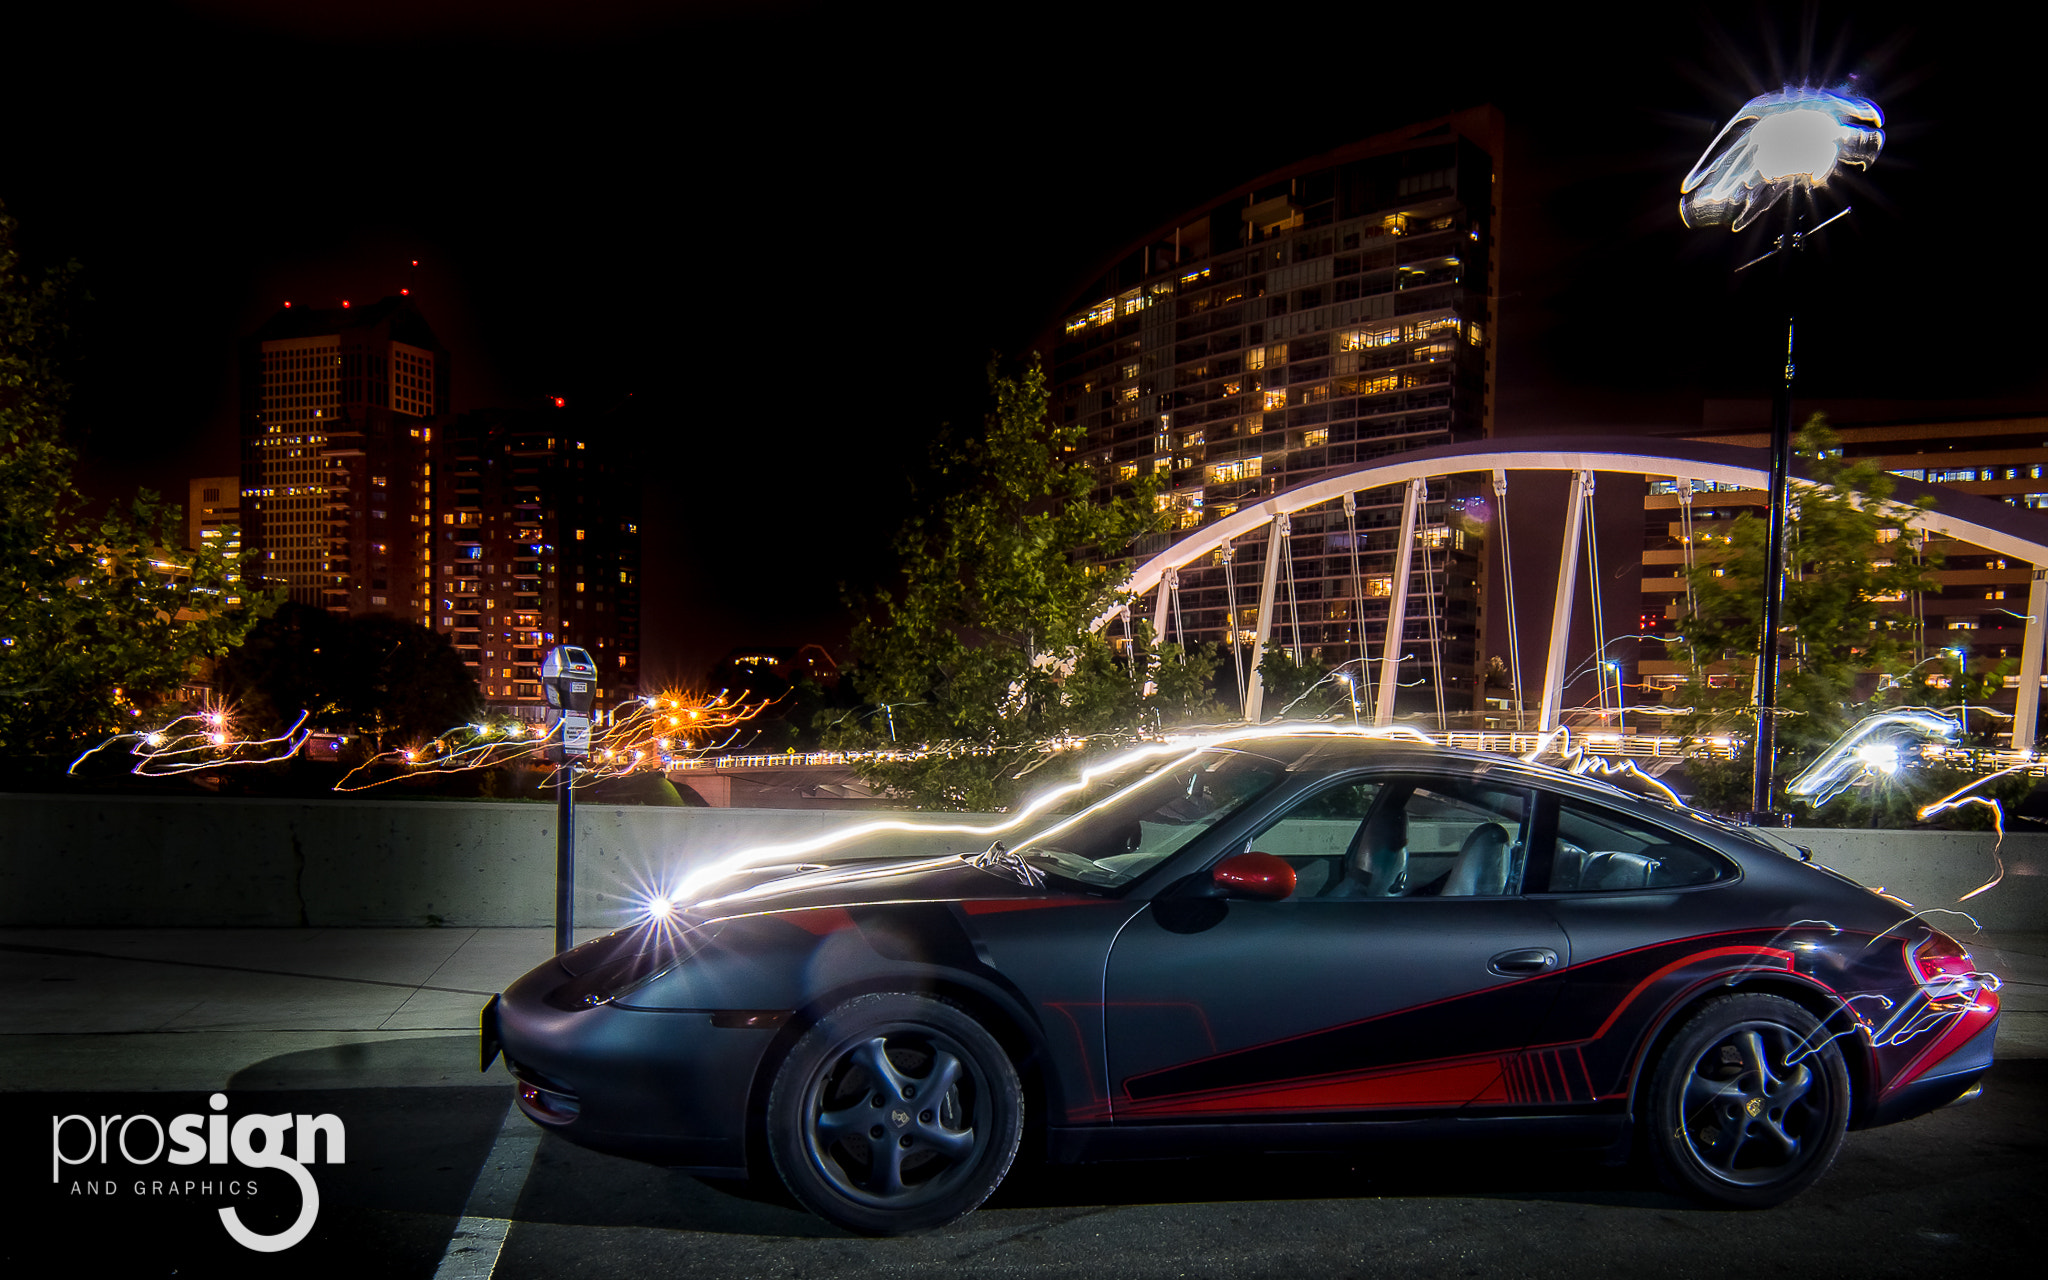 Sony ILCA-77M2 sample photo. Porsche 911 custom wrapped with hand-laid graphics in long exposure - columbus, ohio usa photography